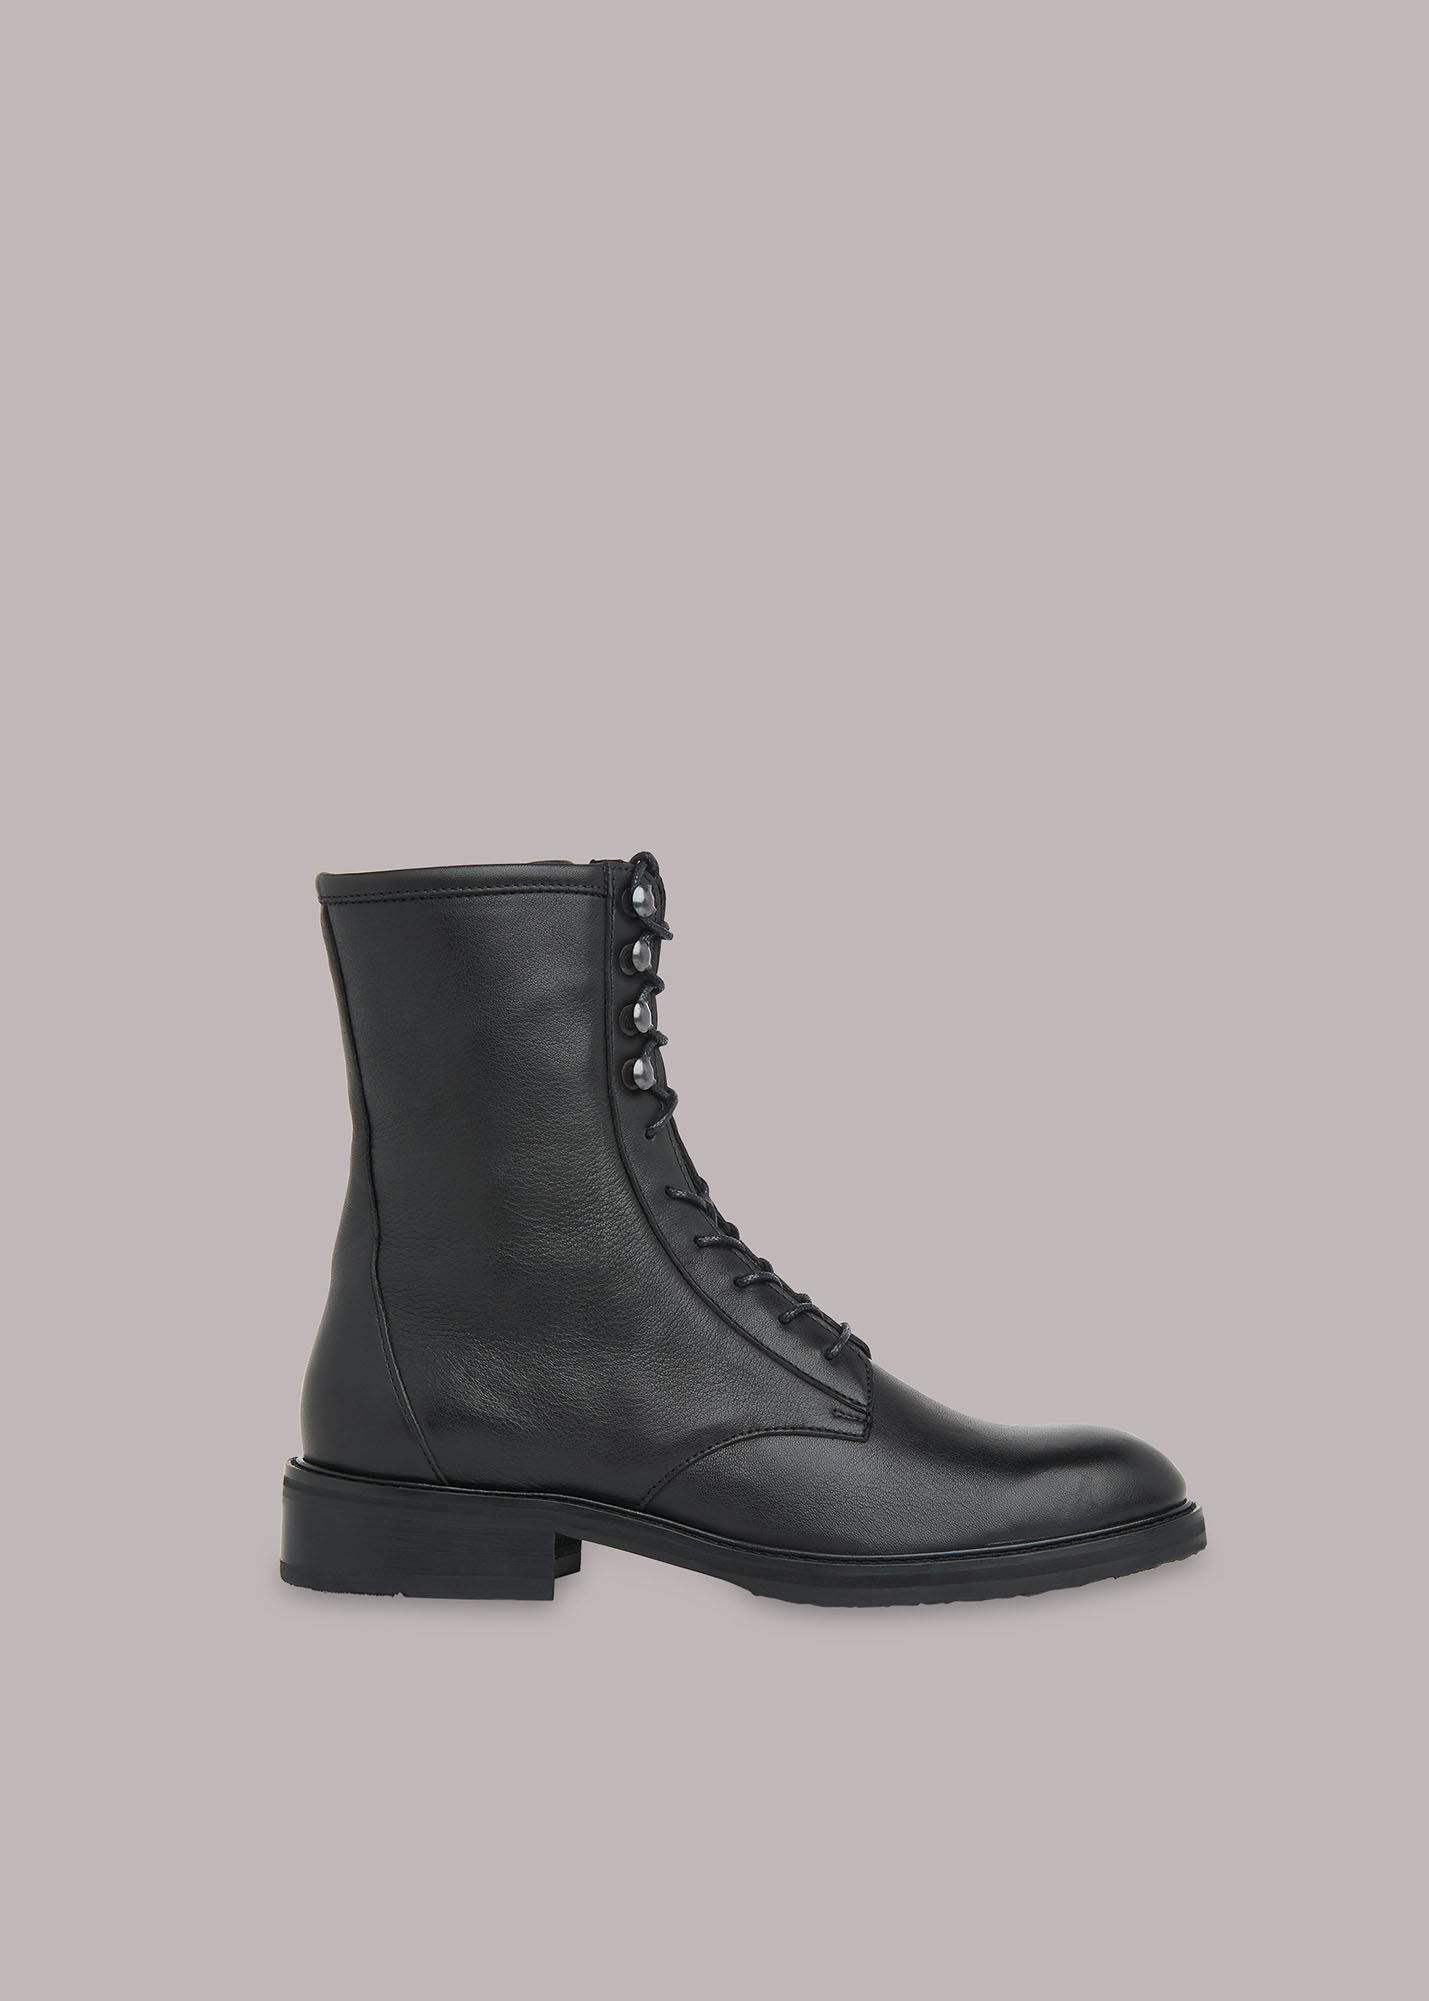 lace up boots black leather